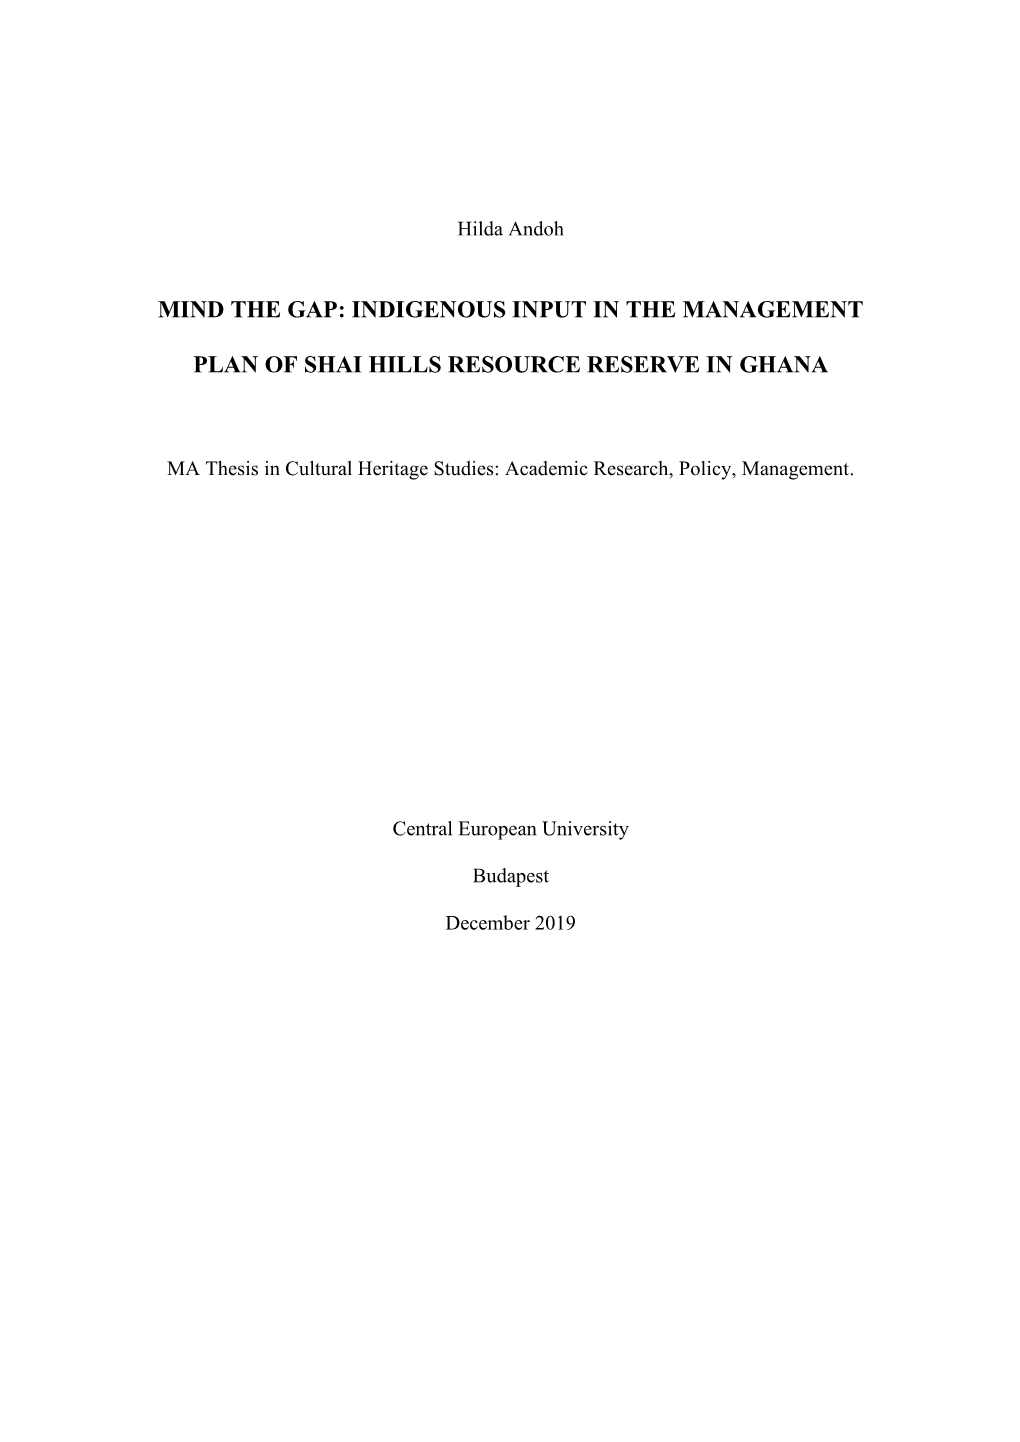 Indigenous Input in the Management Plan of Shai Hills Resource Reserve